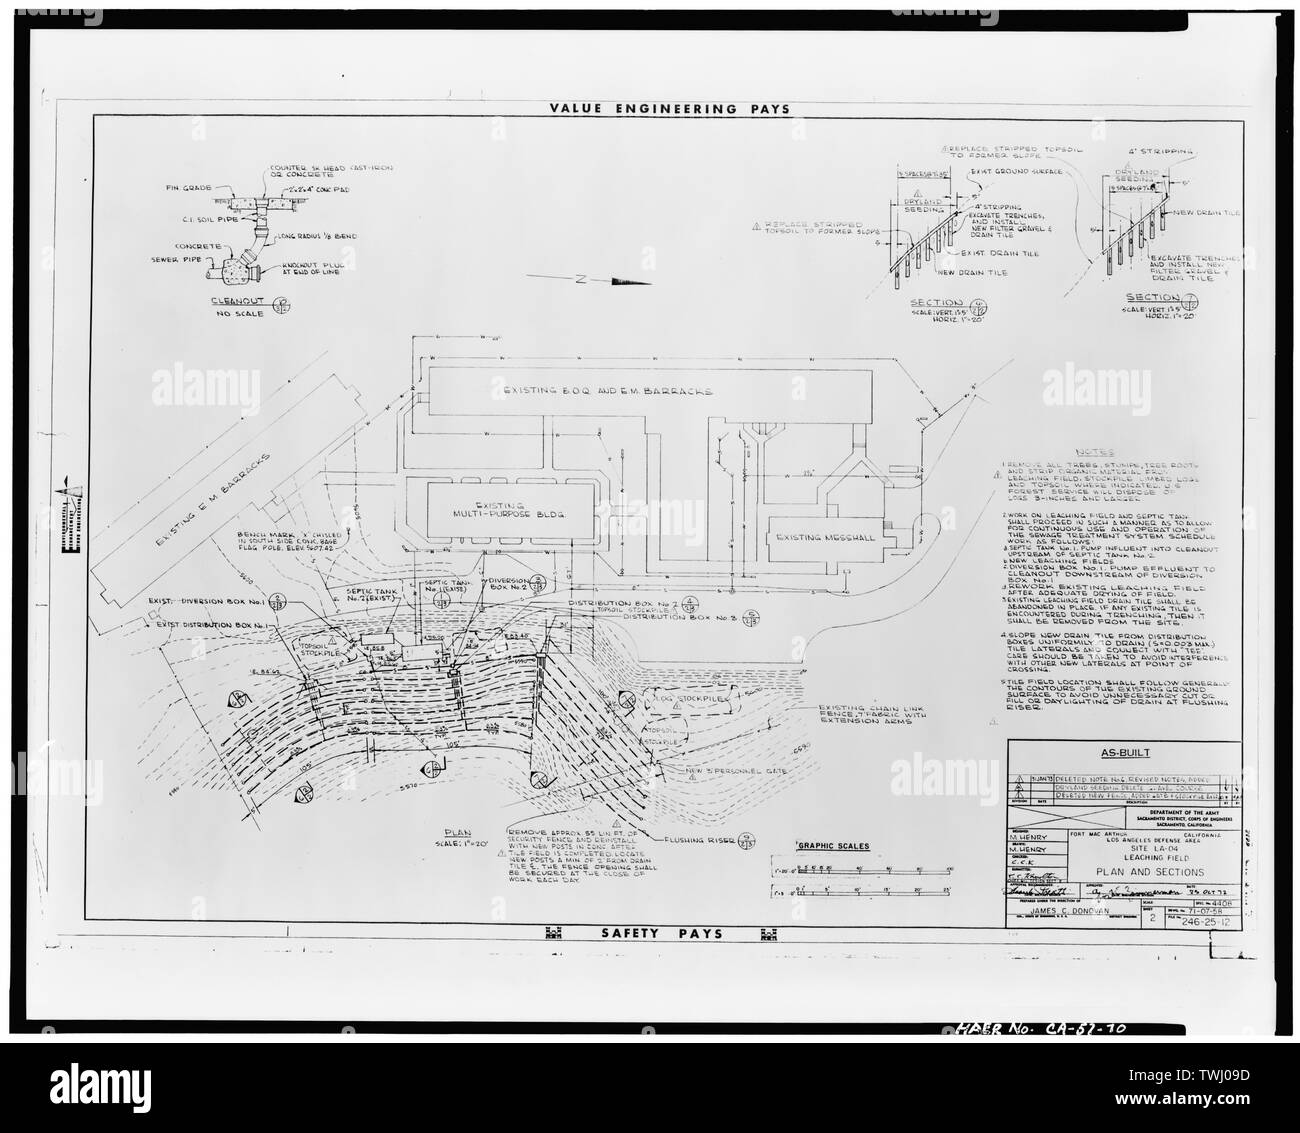 SITE LA-04-LLEACHING FIELD PLAN AND SECTIONS - Mount Gleason Nike Missile Site, Angeles National Forest, South of Soledad Canyon, Sylmar, Los Angeles County, CA Stock Photo